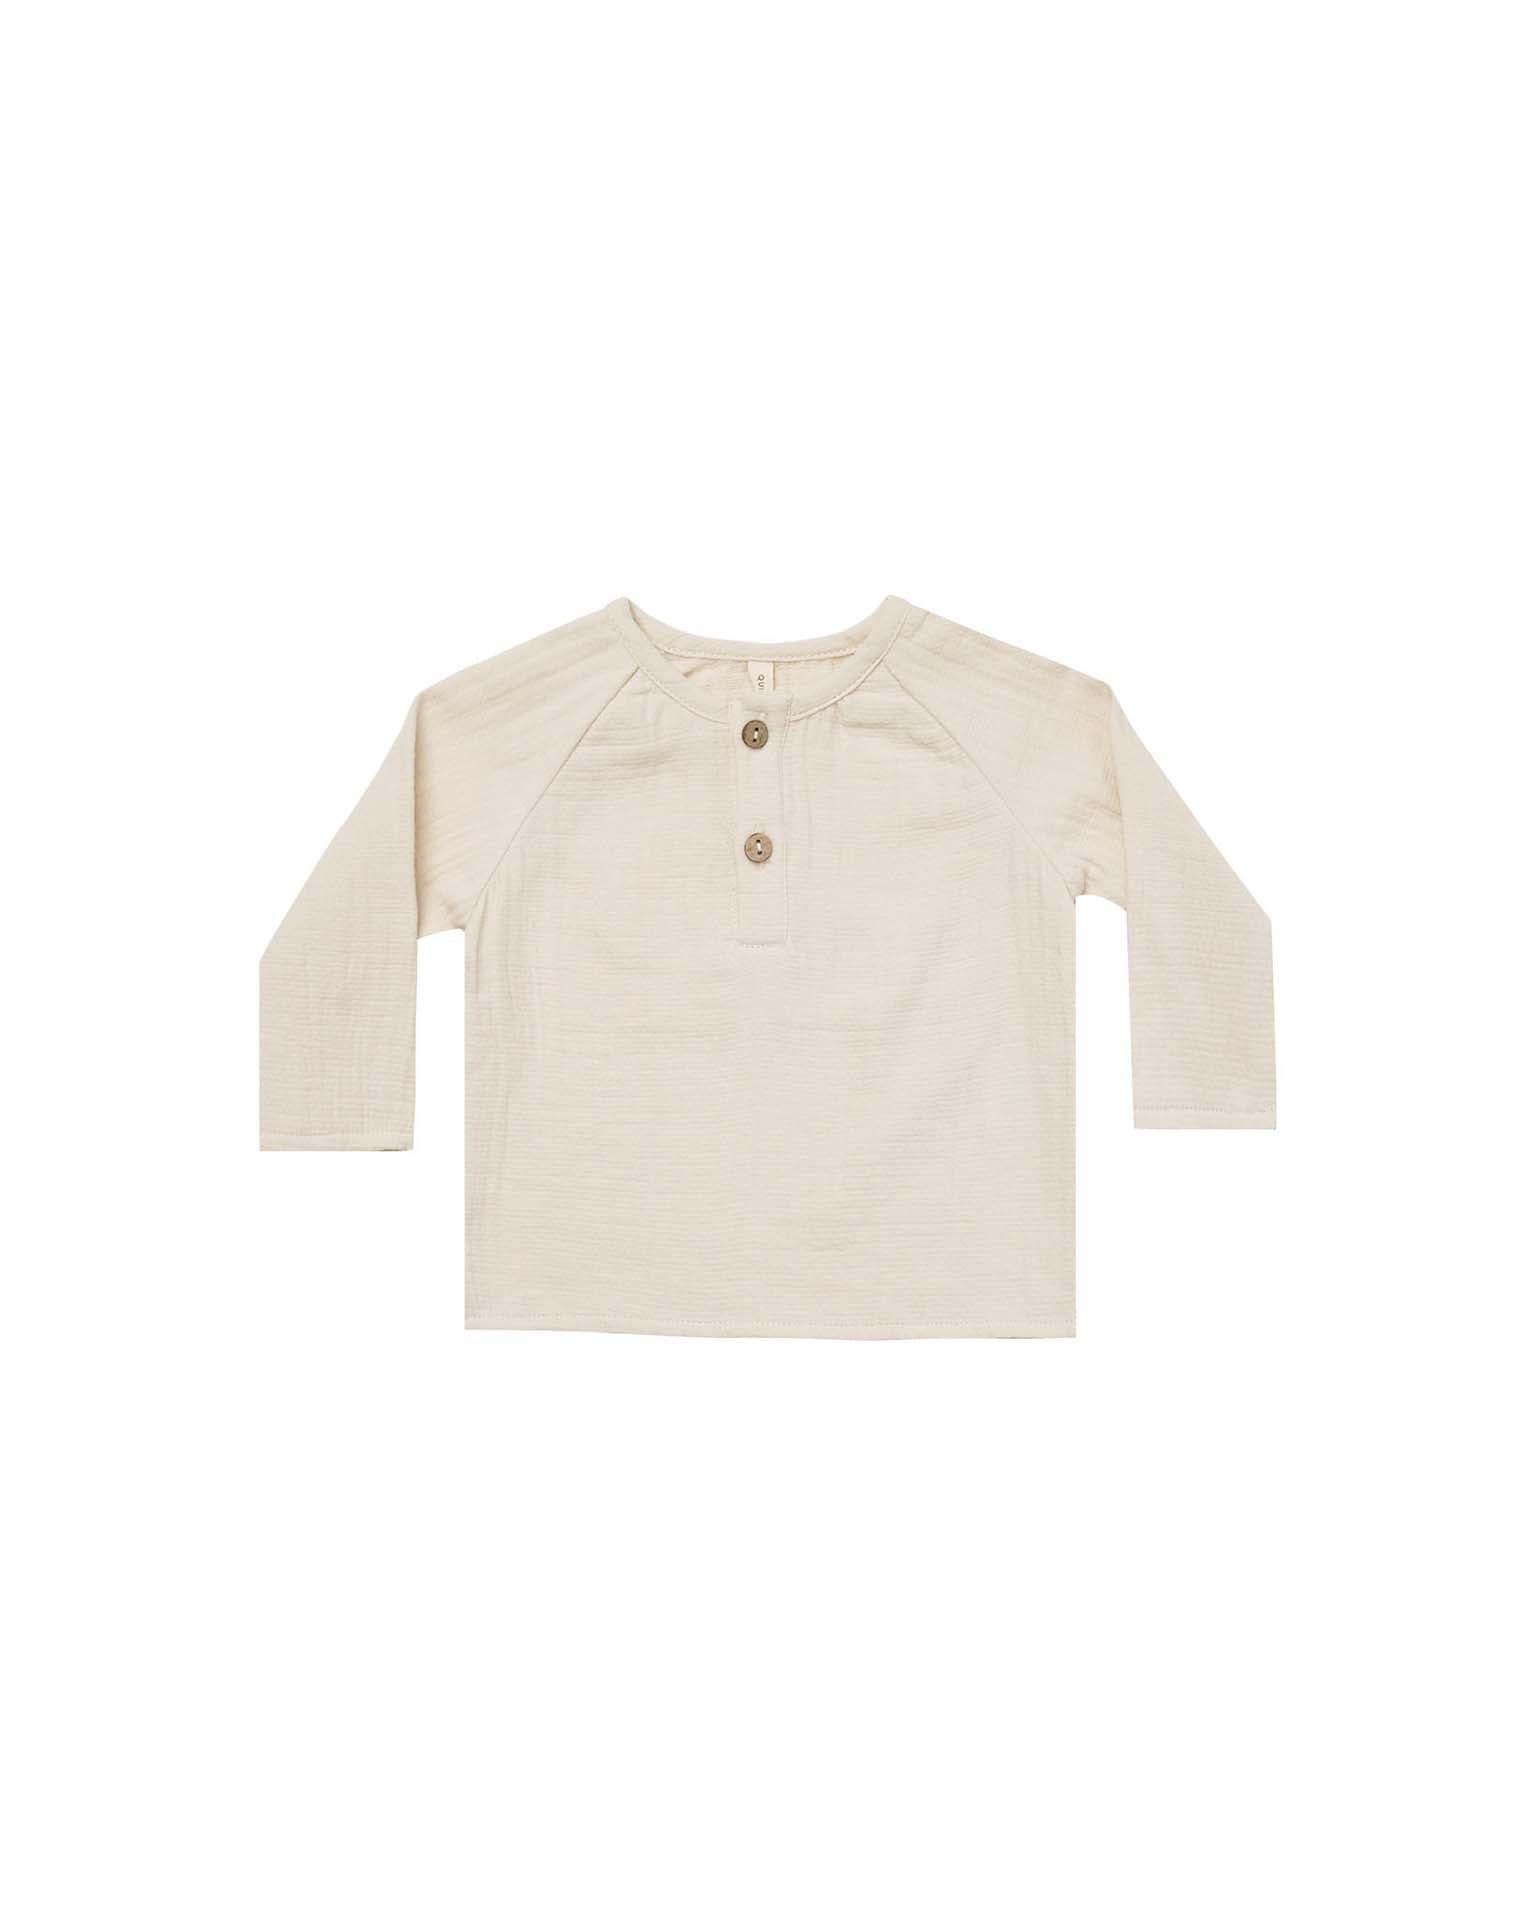 Little quincy mae BABY zion shirt in natural